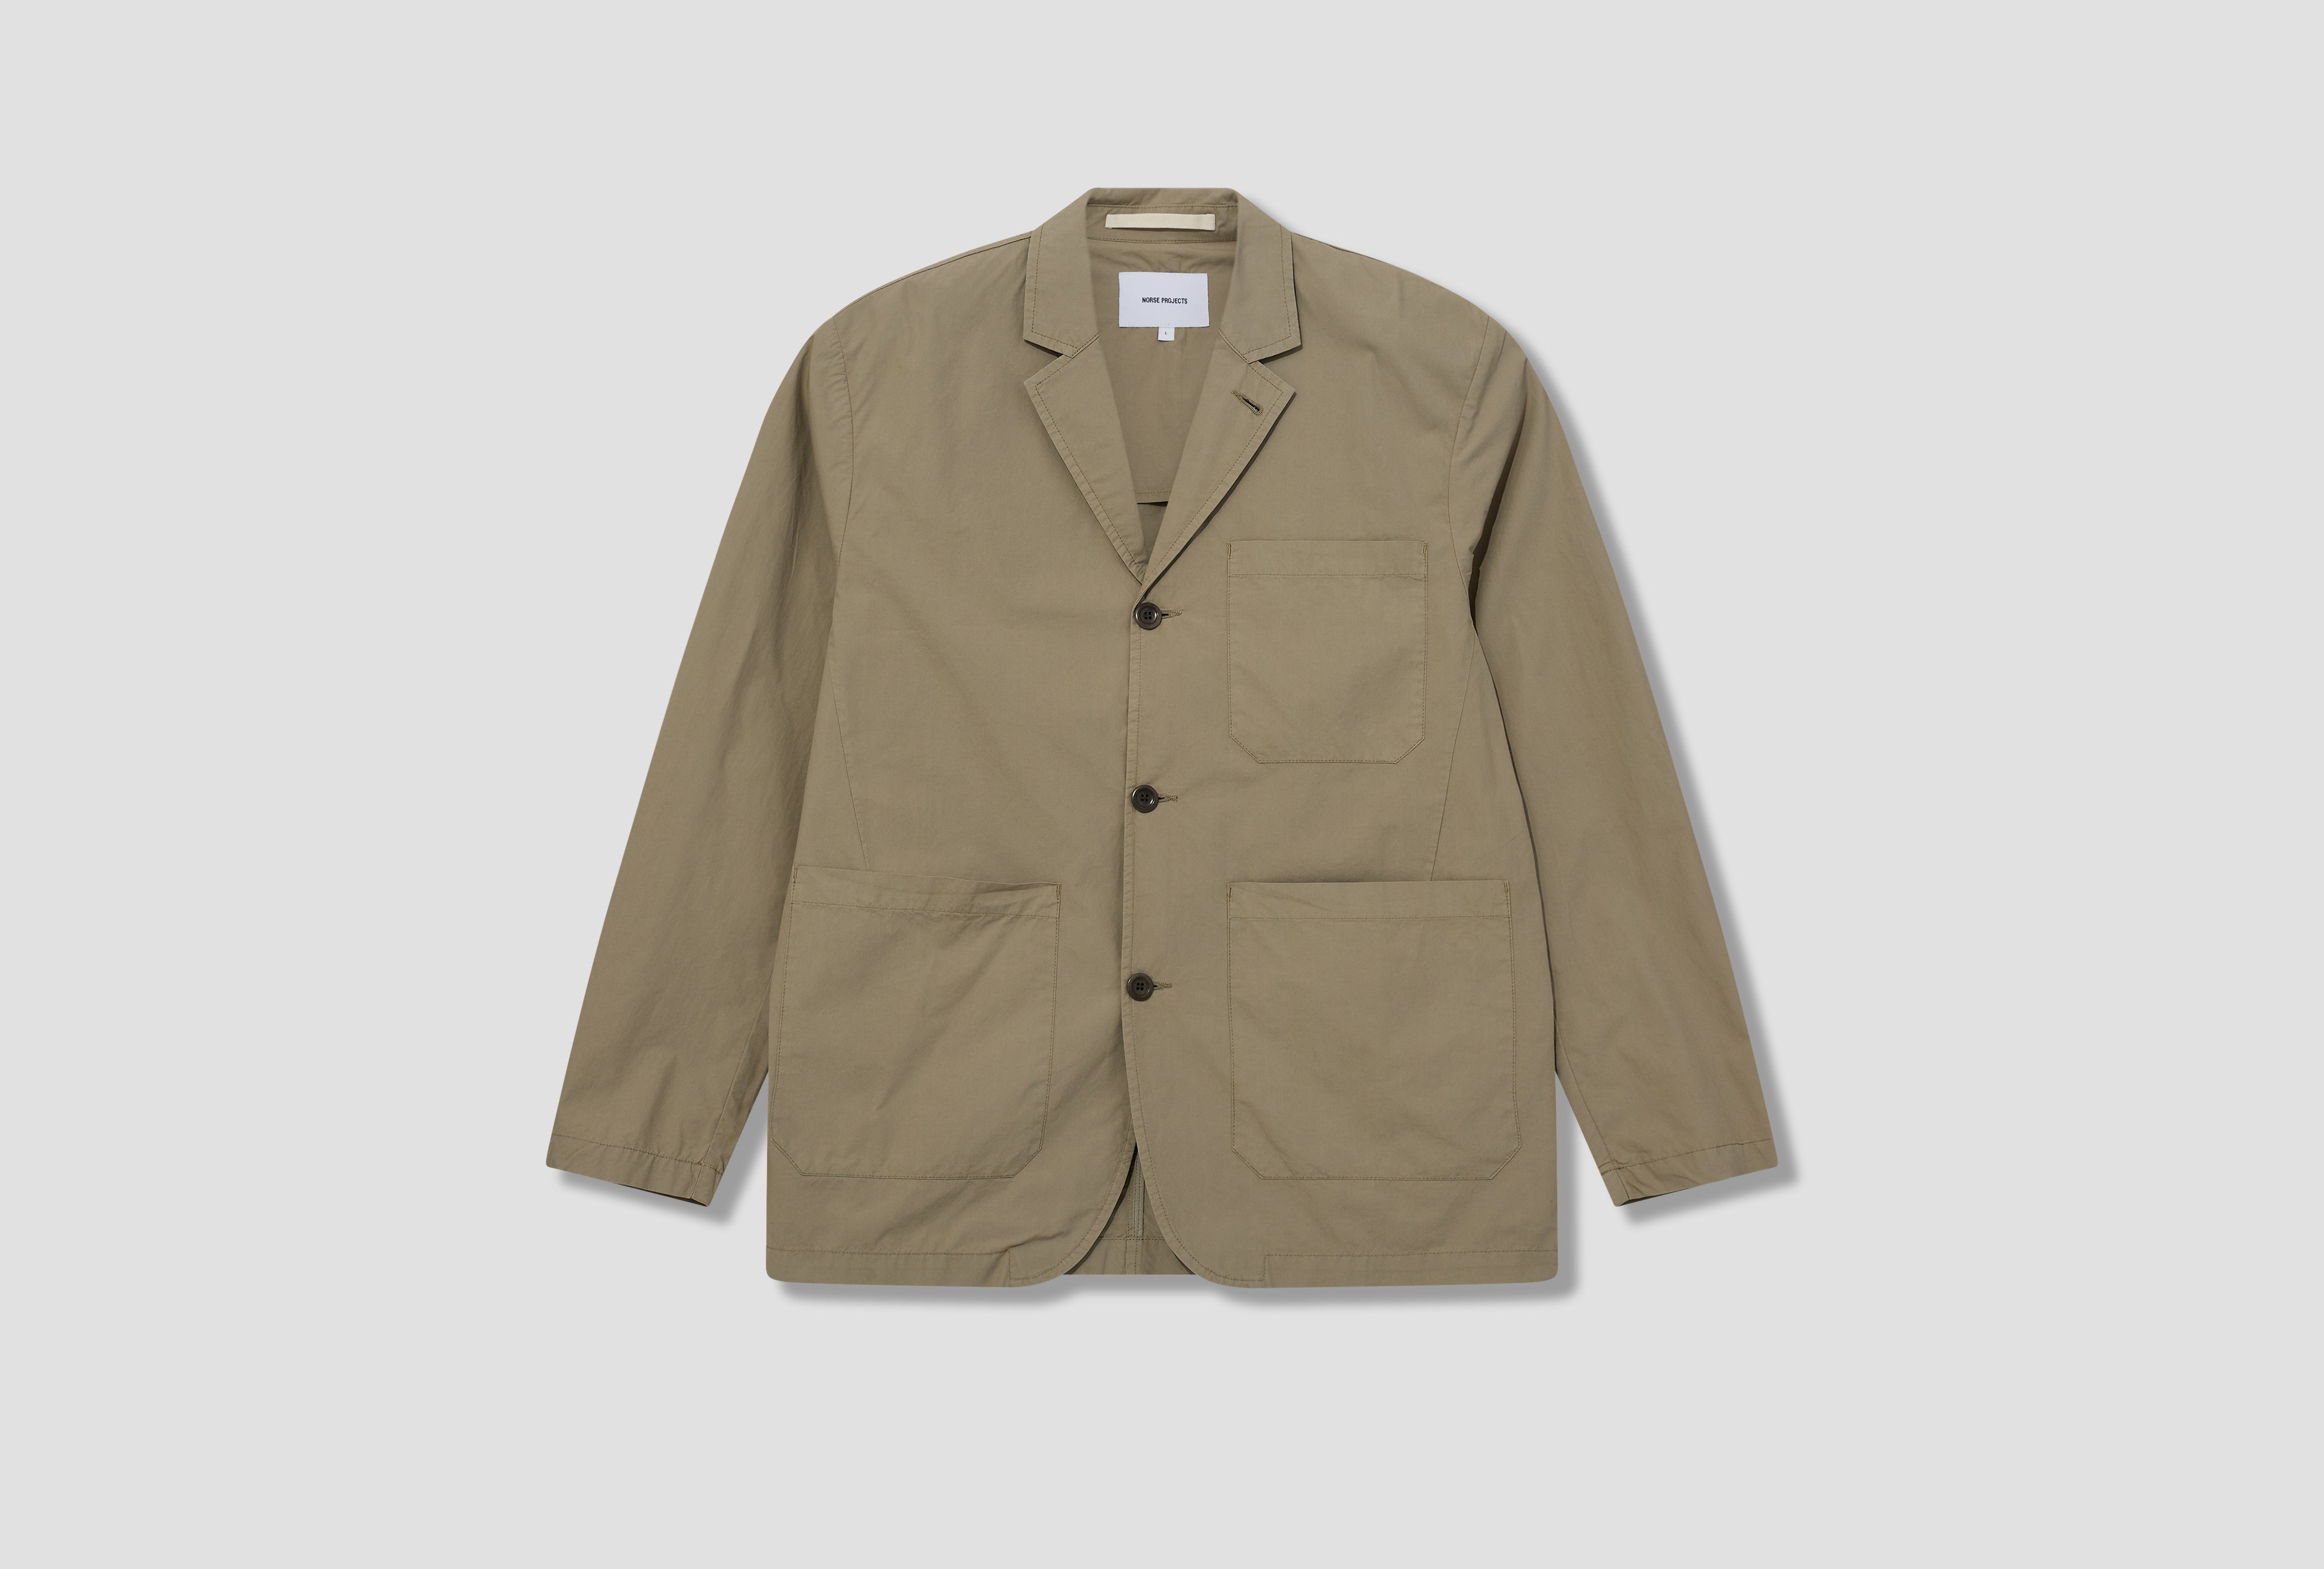 Norse Projects | Menswear and Accessories | Shop Online at HARRESØ